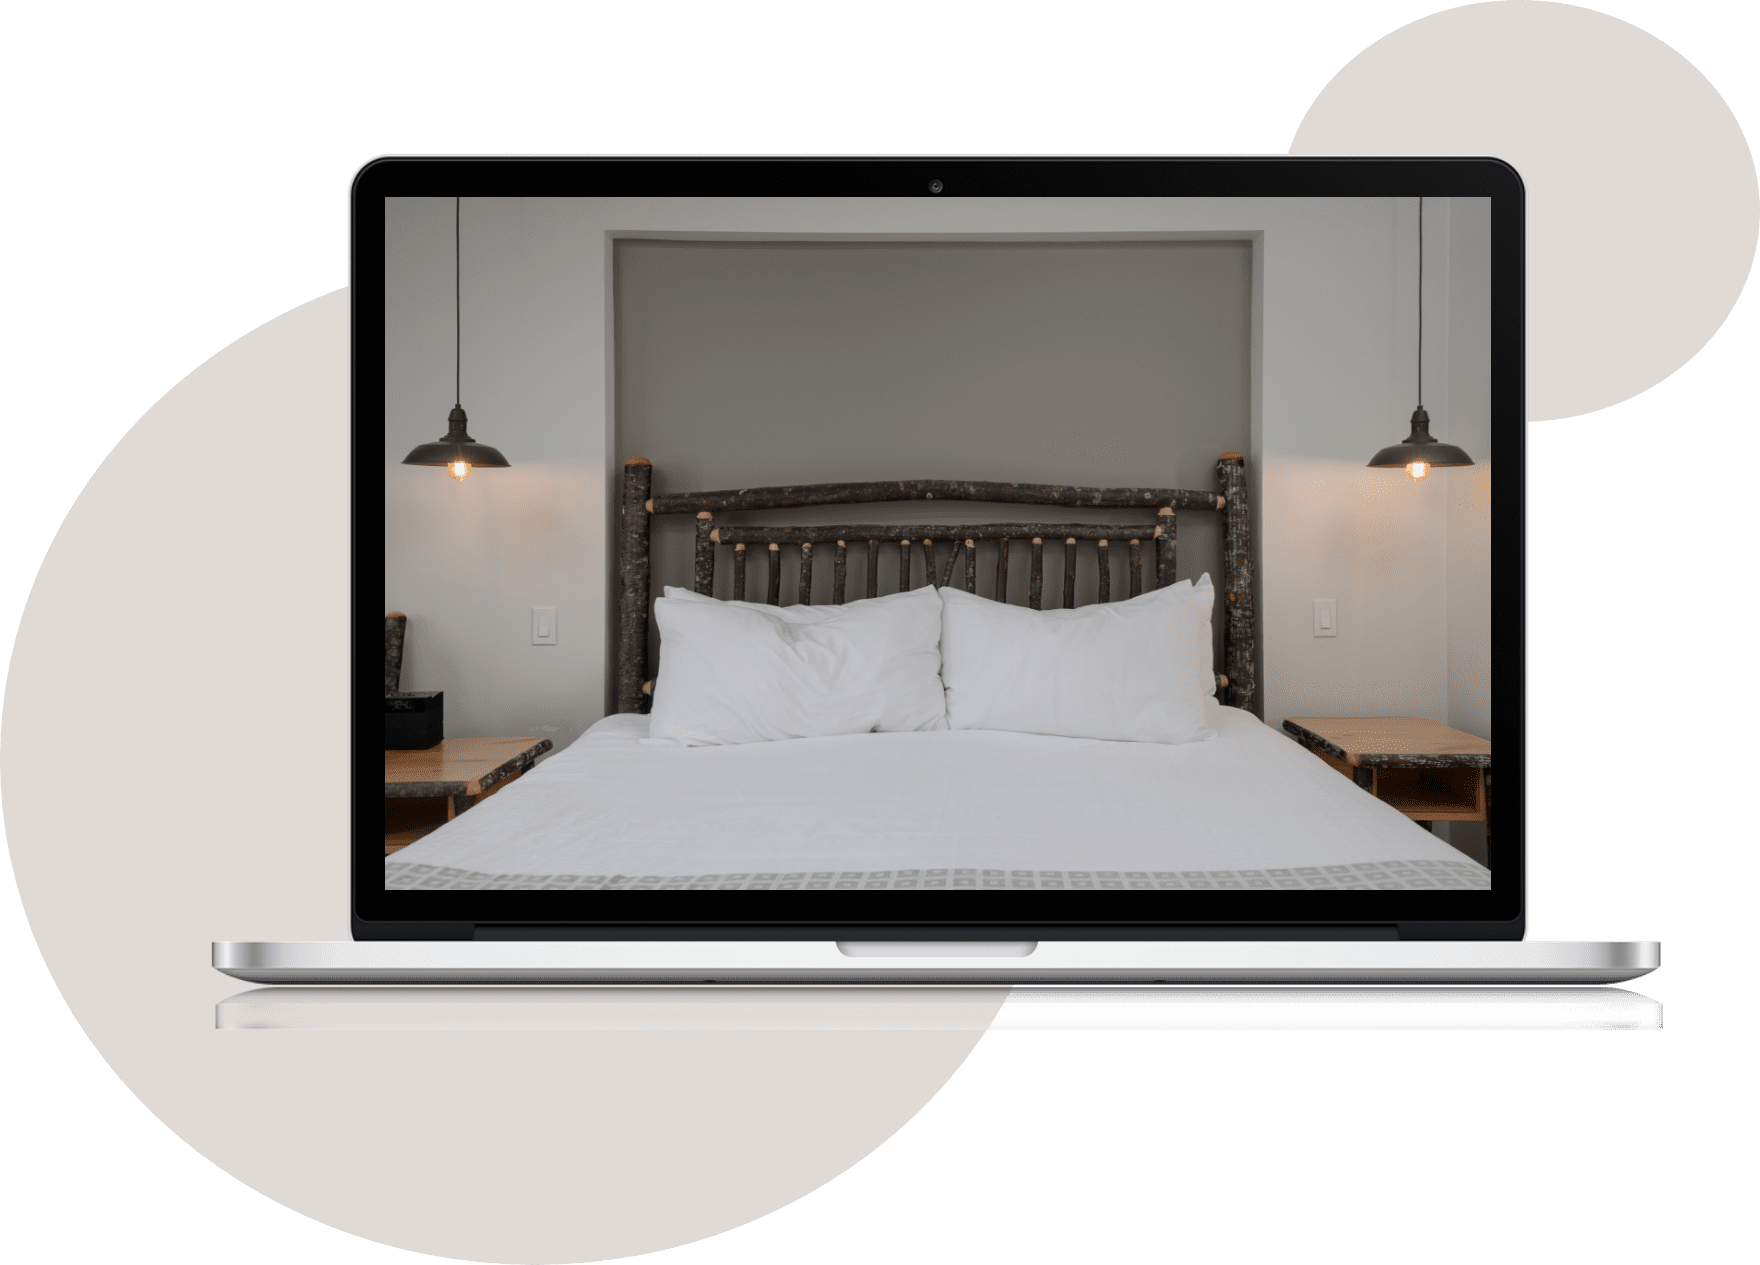 Black and silver Macbook with image of Tigh-Na-Mara Resort Queen bed with realistic wood bedframe on screen